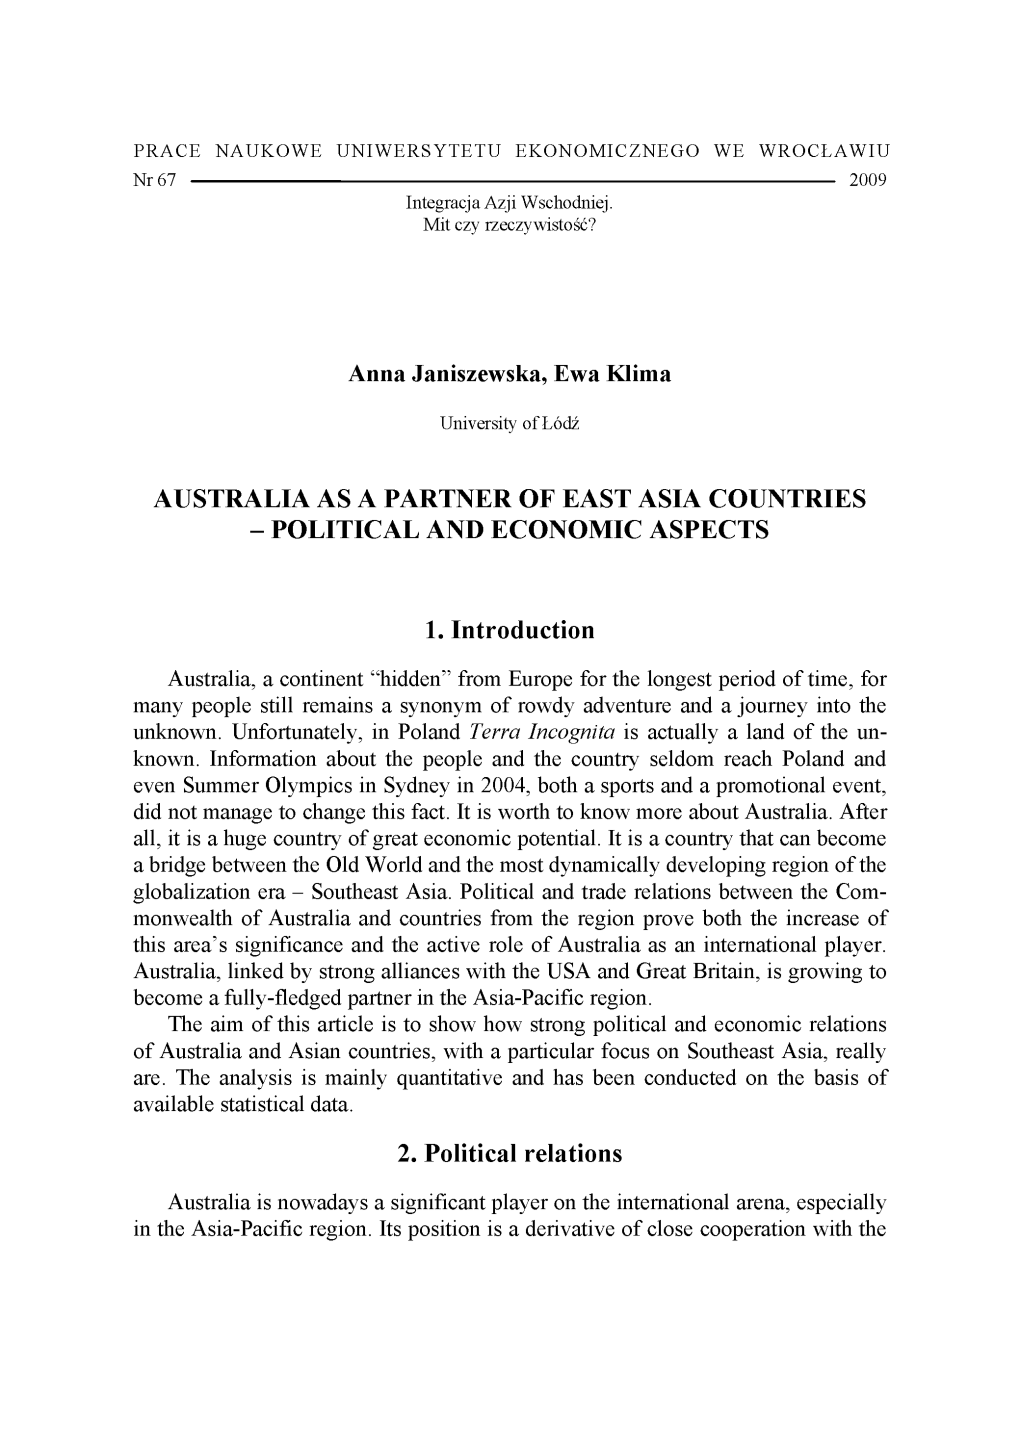 Australia As a Partner of East Asia Countries – Political and Economic